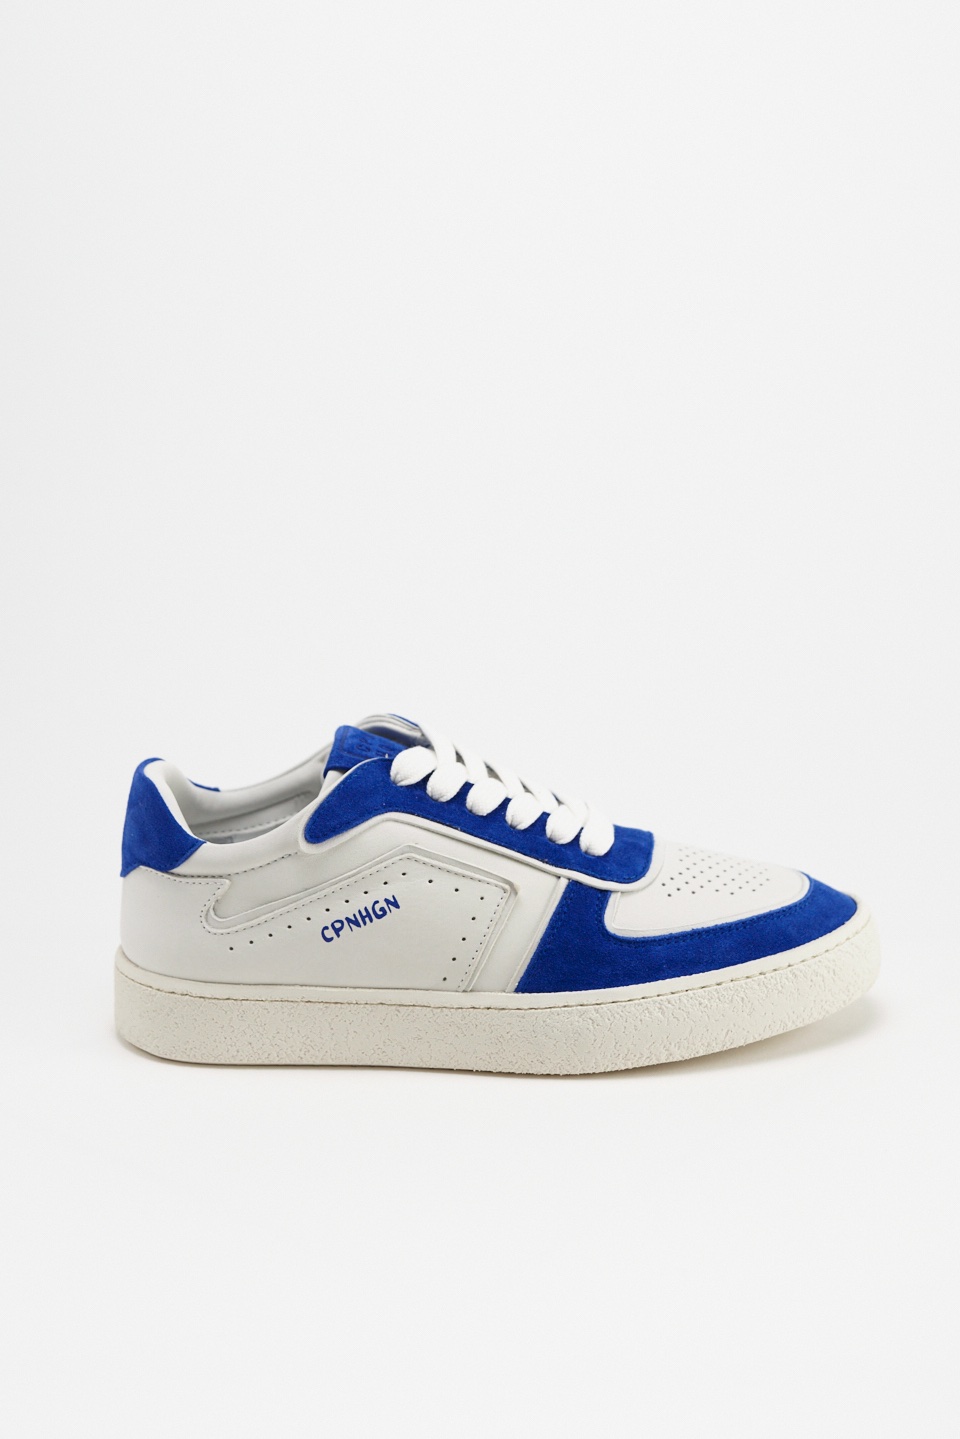 CPH264 leather mix white/blue